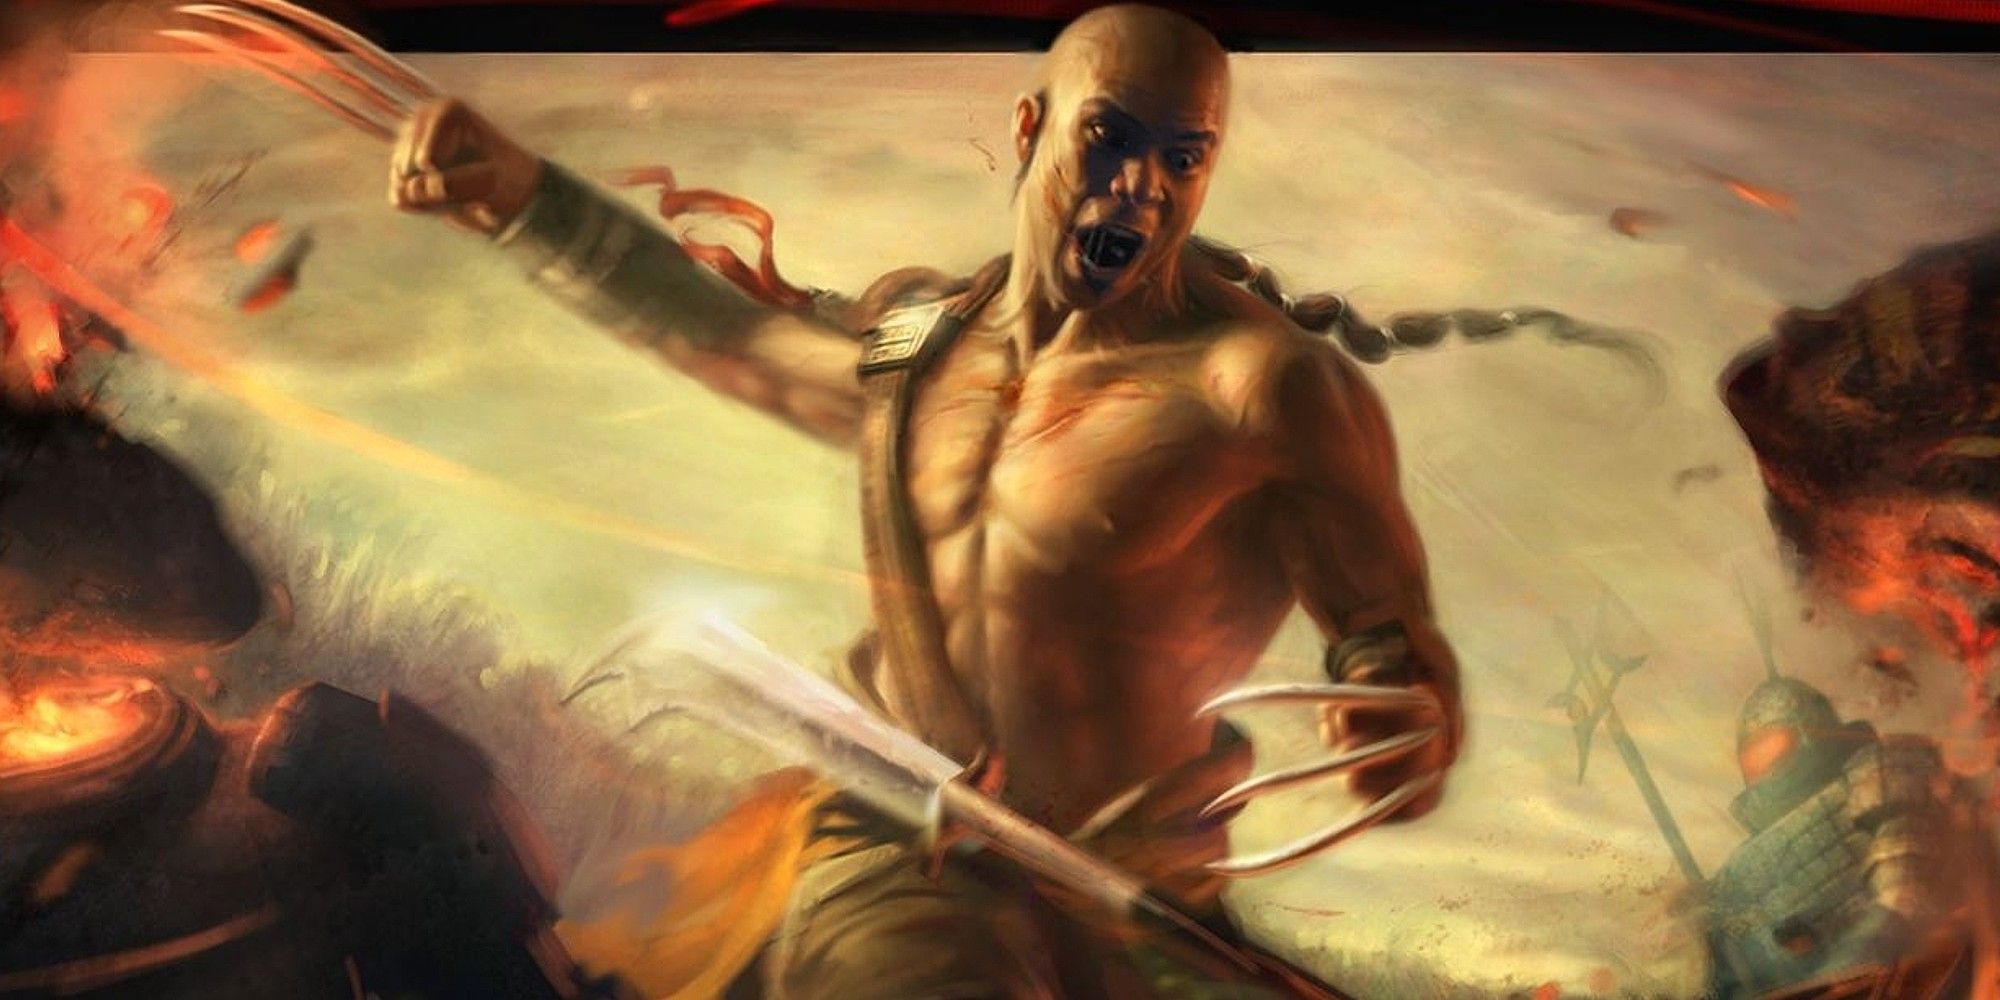 BioWare's Jade Empire 2 Would've Followed On From The Bad Ending